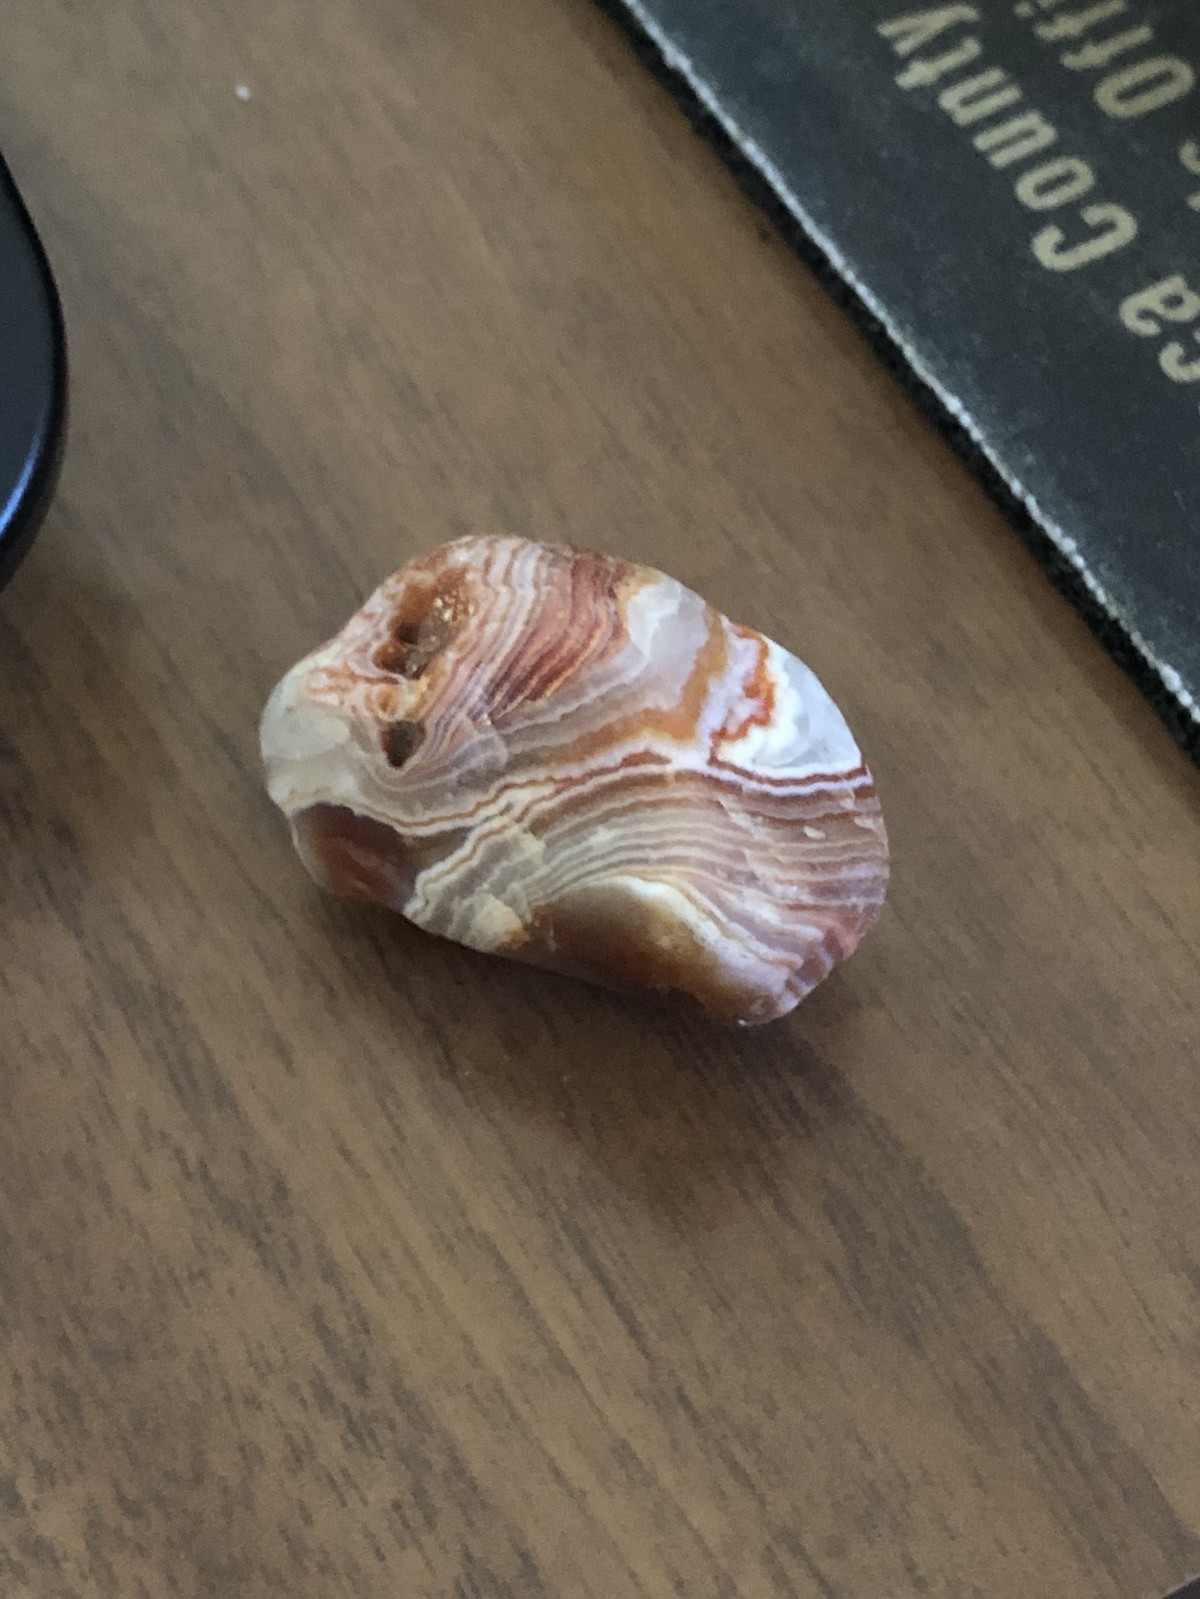 idiotic Pangolins. One of my best agates from my collection. I found it, not bought it. Hope you guys like it! join list: RockCollectionTMA (39 subs)Mention Cli